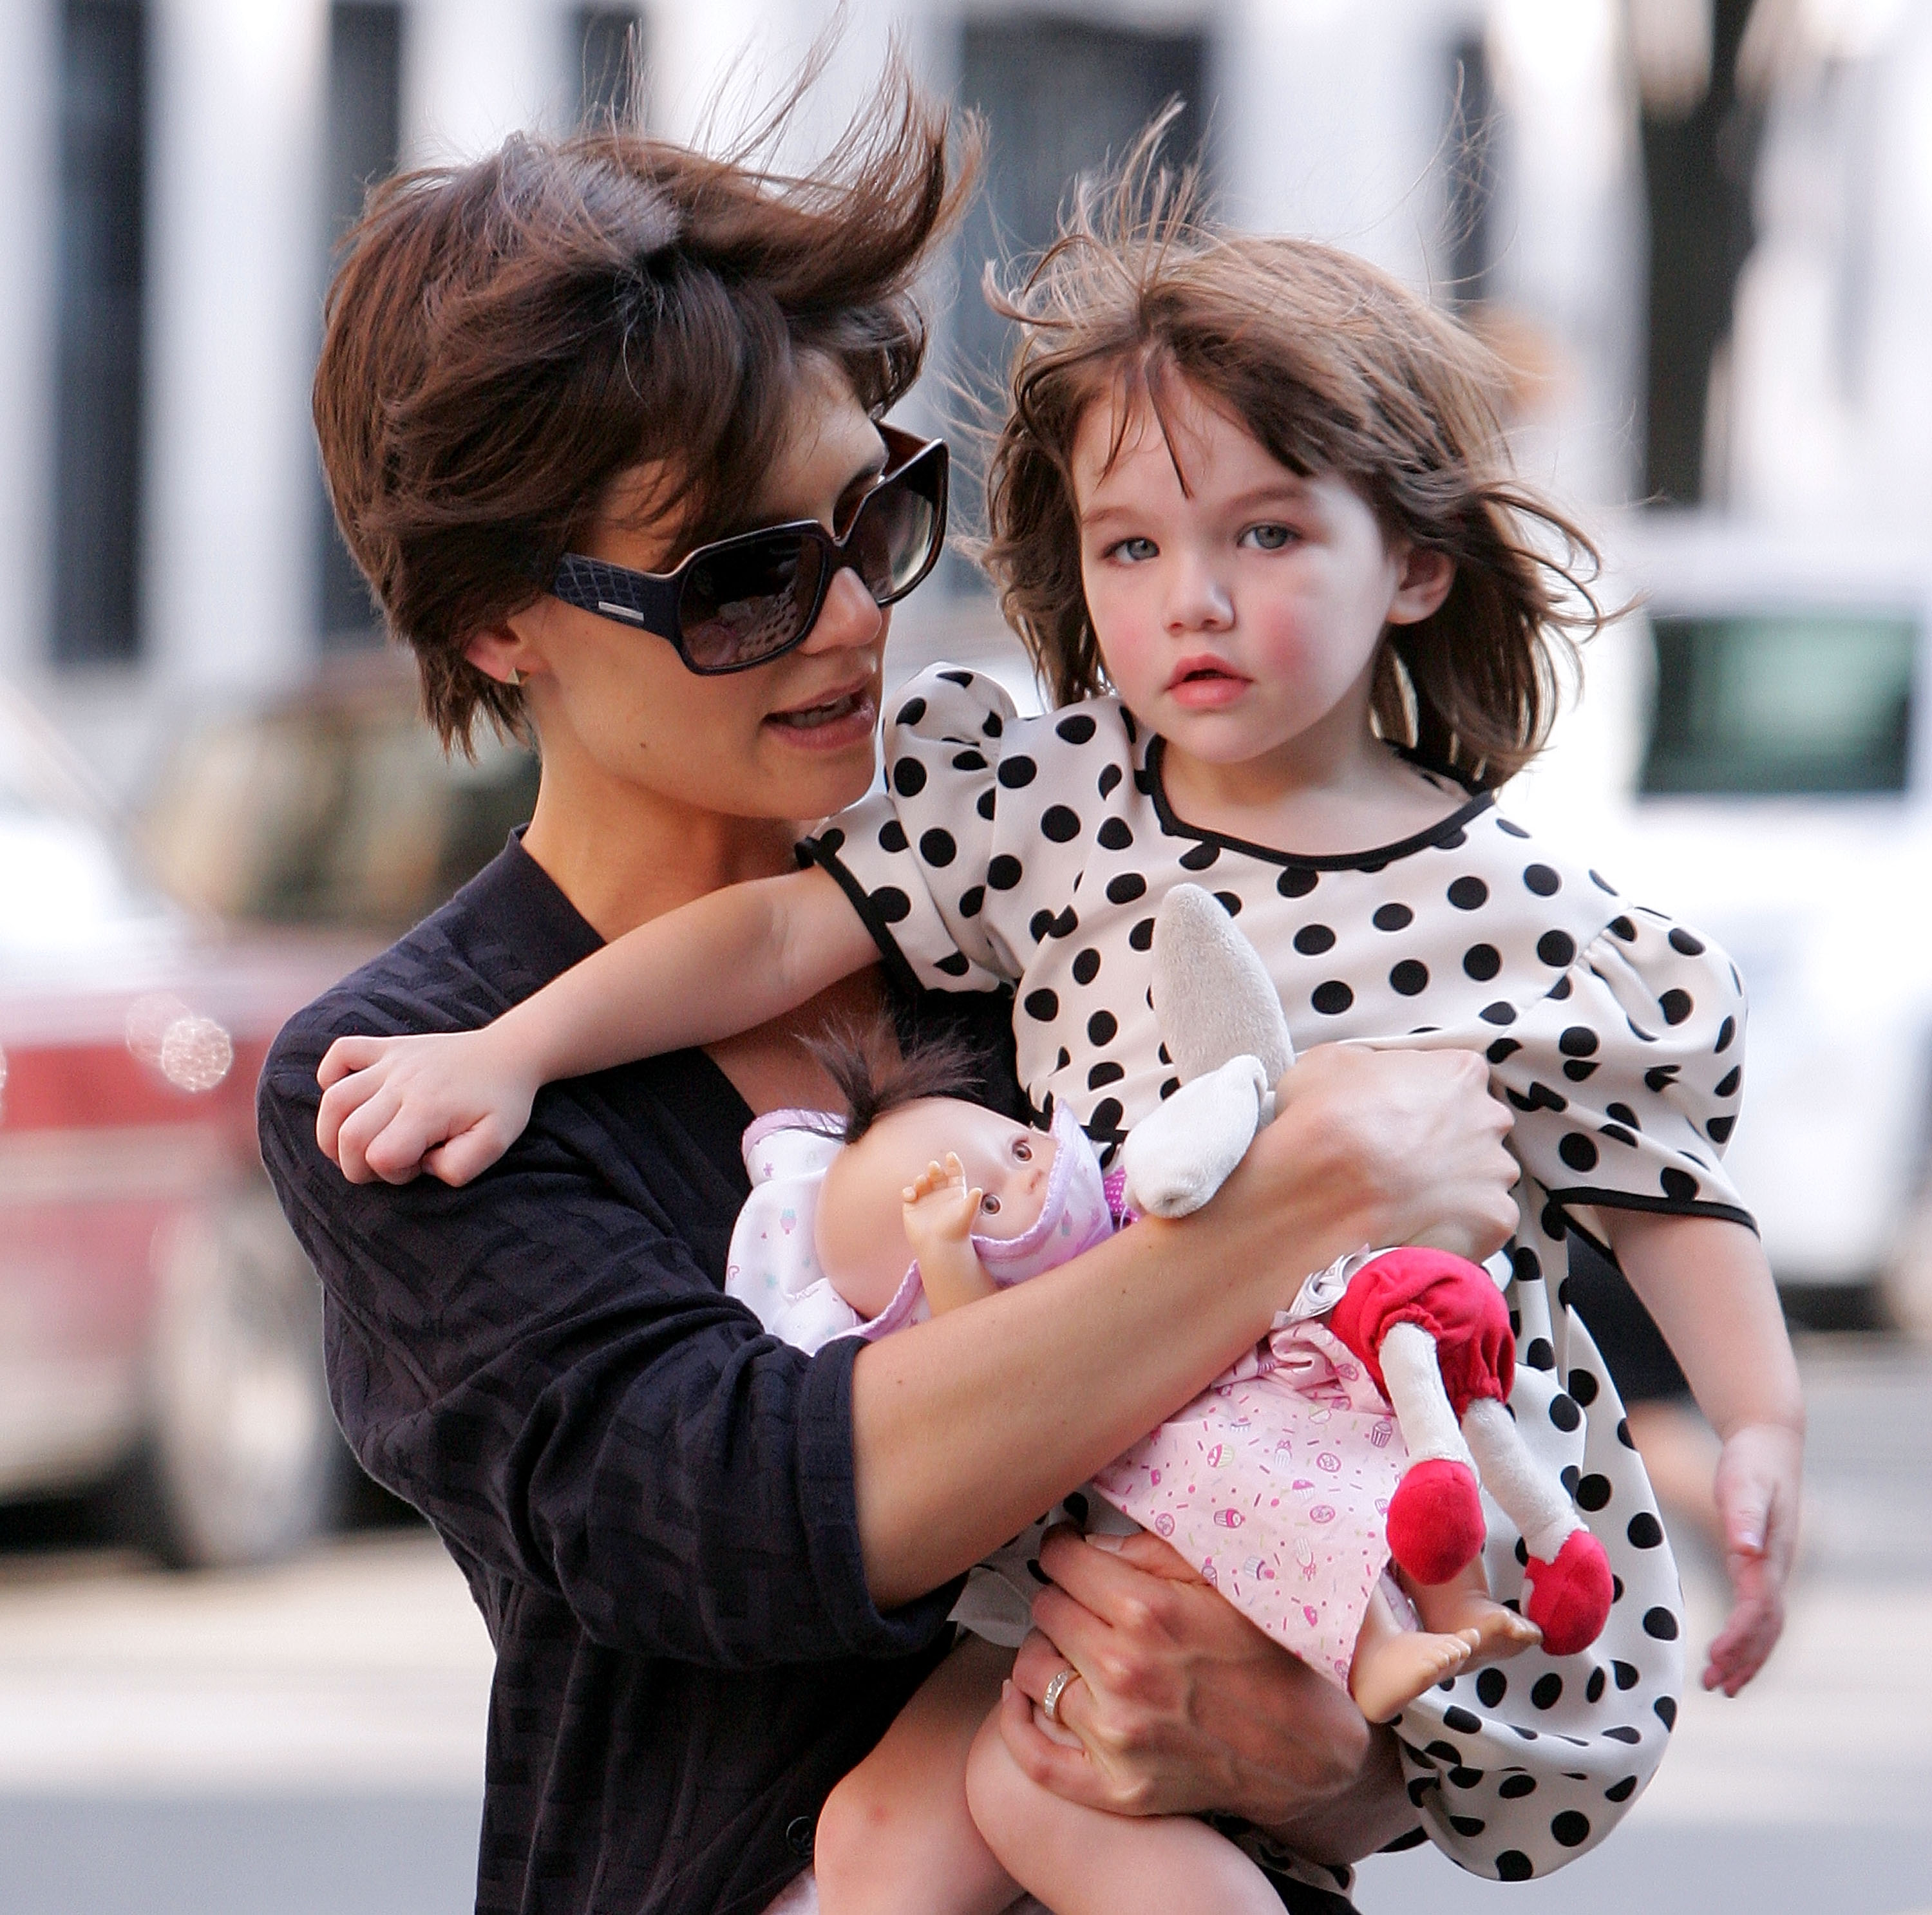 Katie Holmes and Suri Cruise spotted on the streets of Manhattan on August 7, 2008 in New York City. | Source: Getty Images